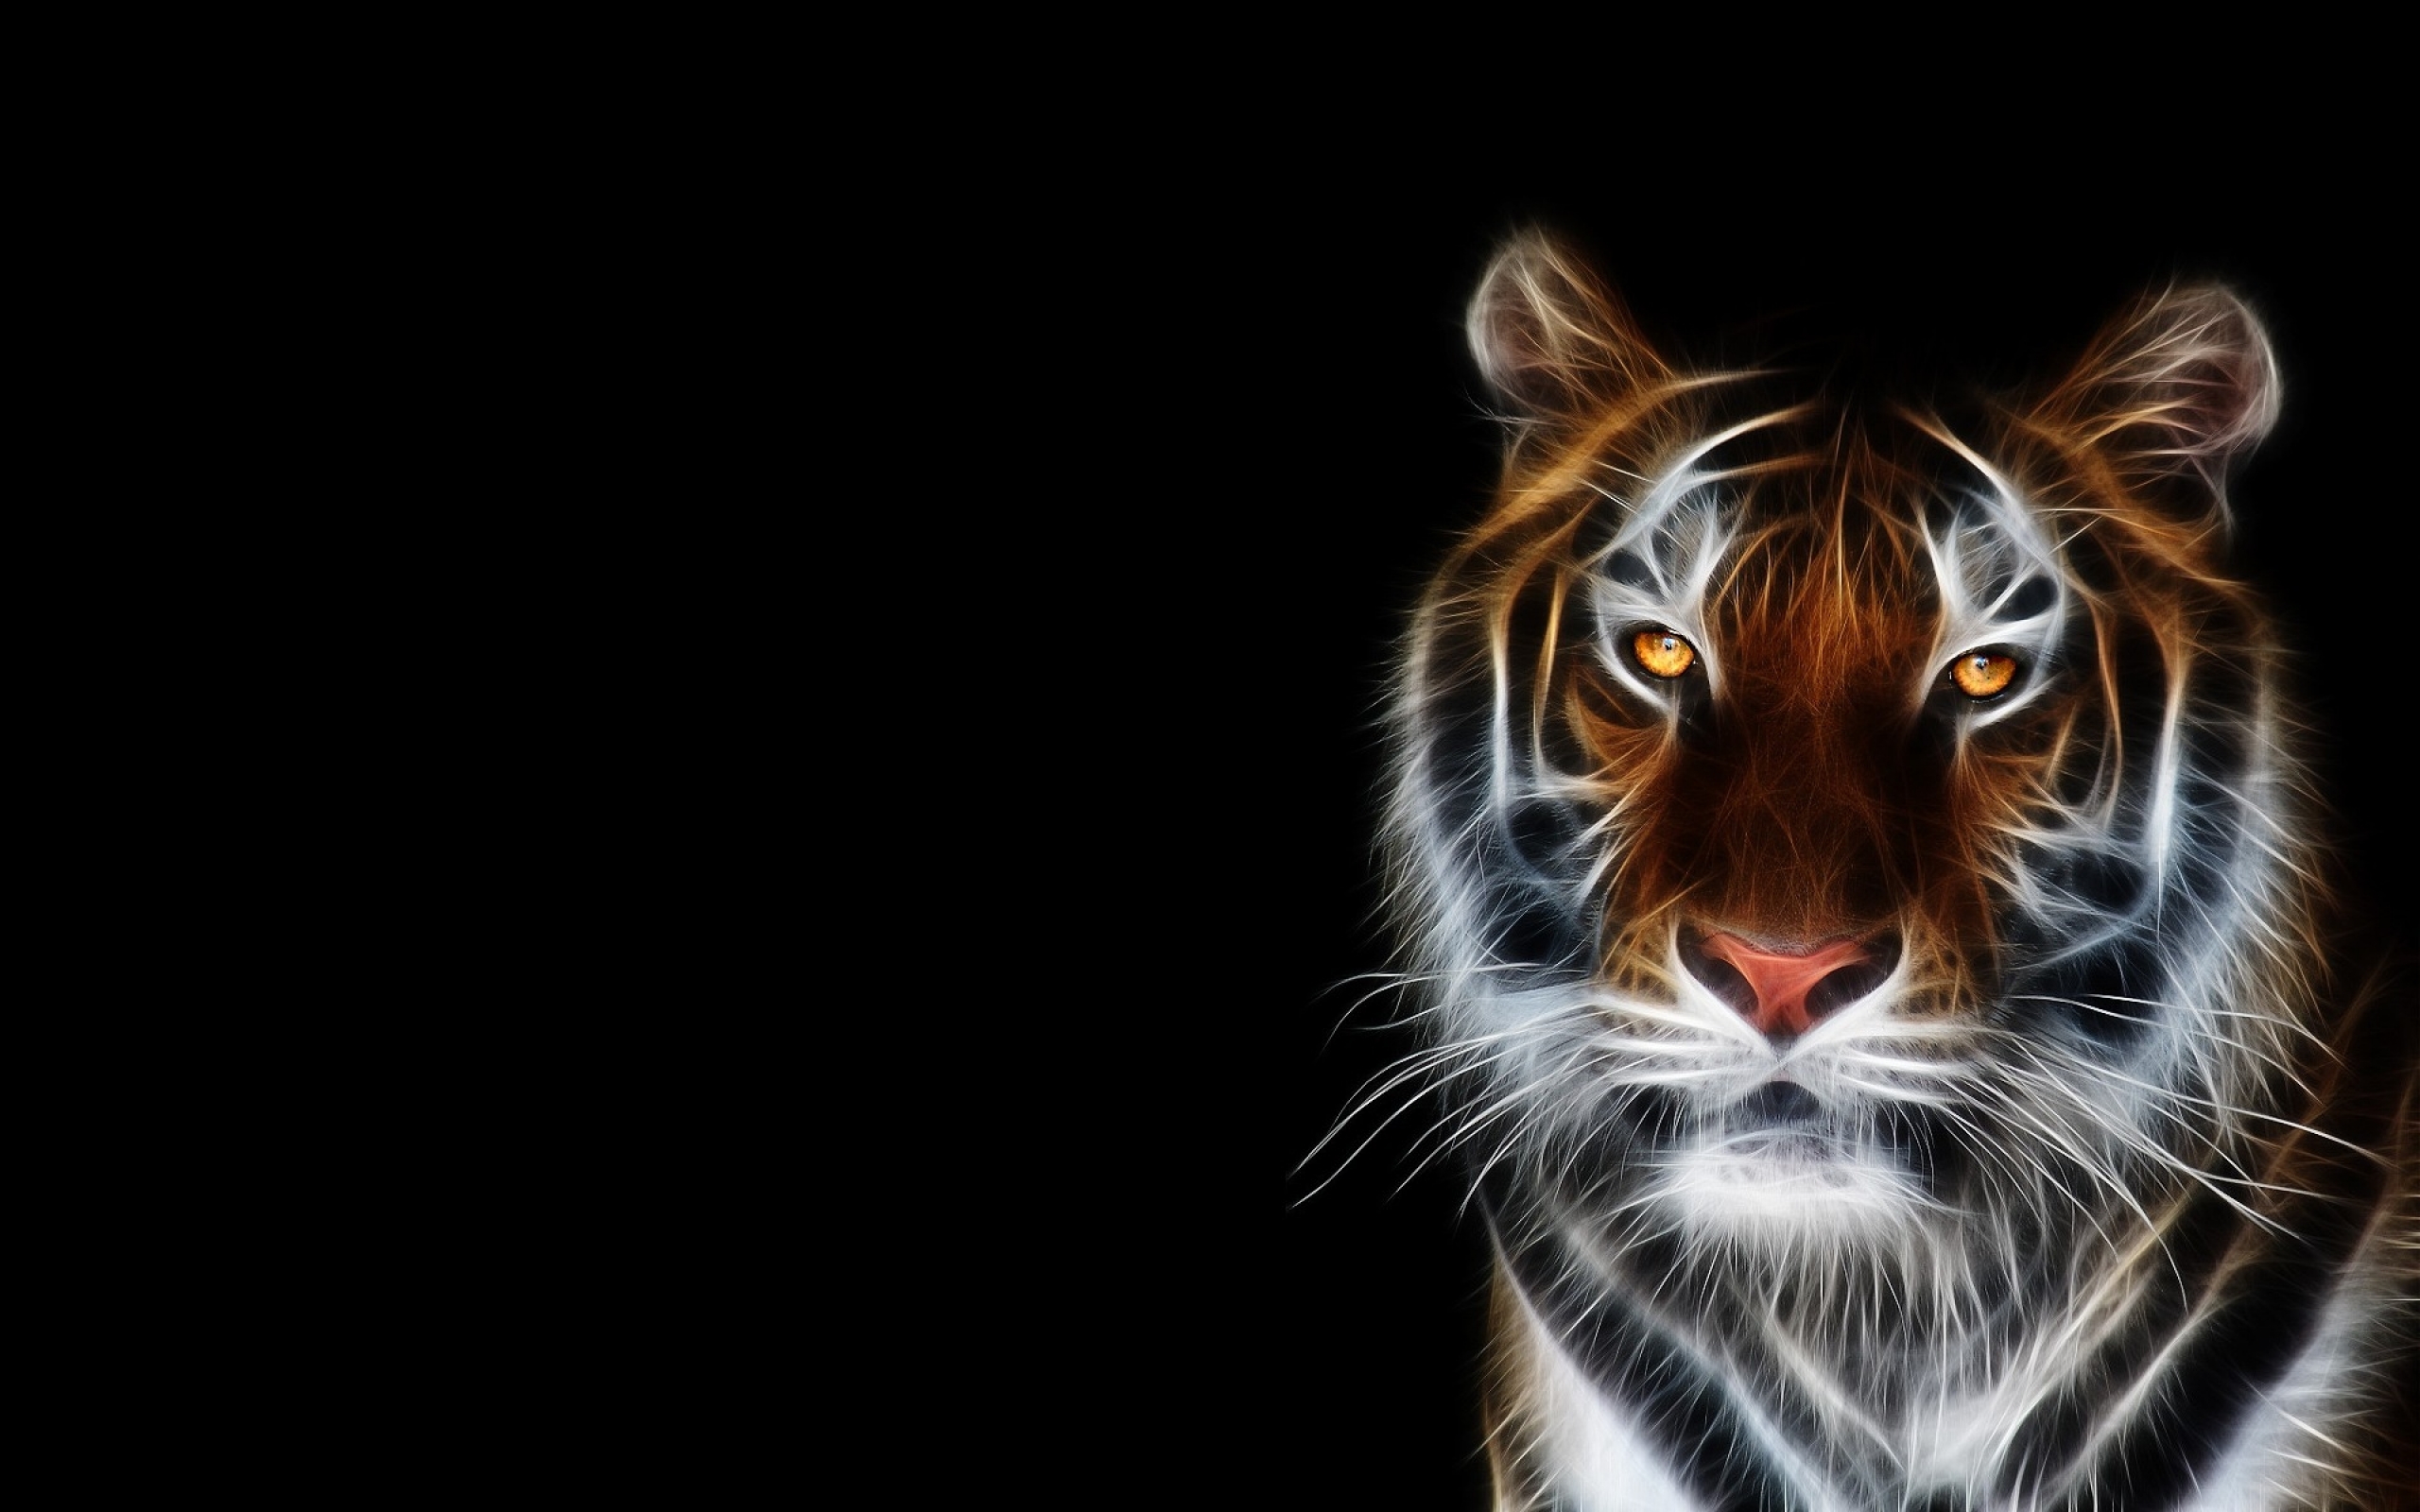 Background Tiger Images Hd - 2560x1600 Wallpaper 